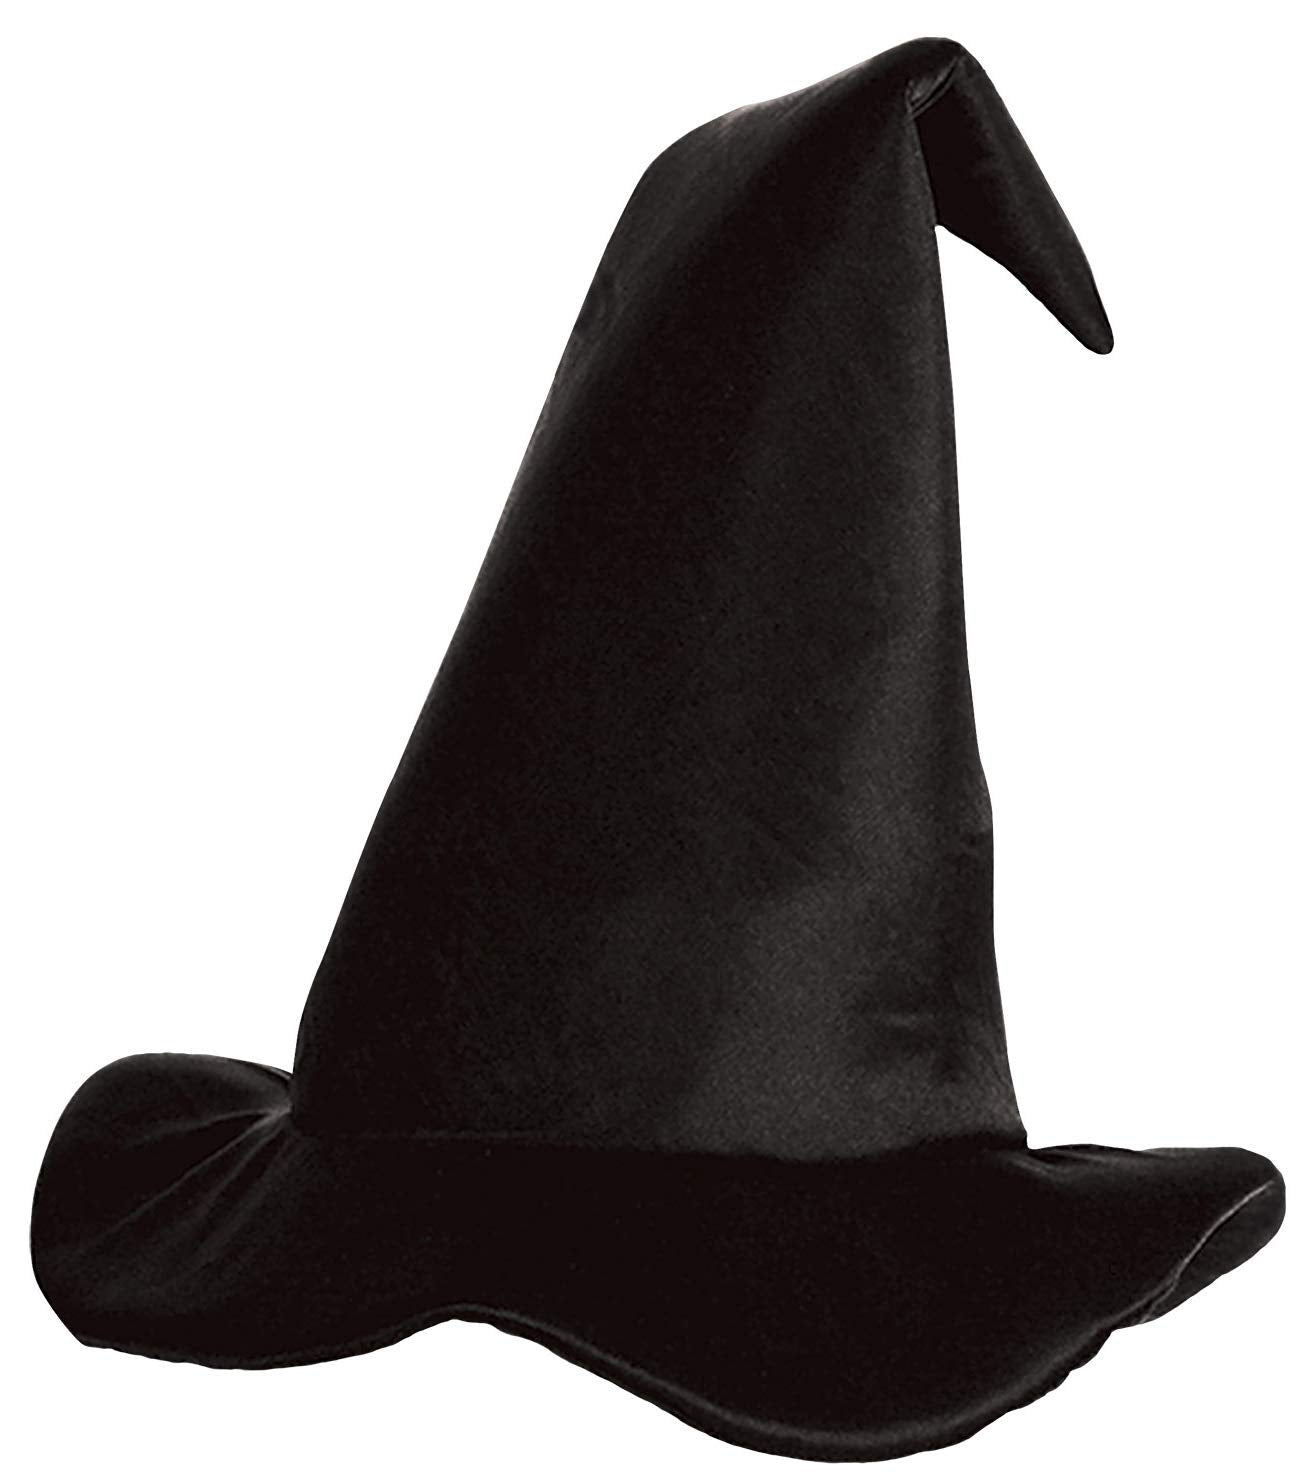 Beistle Satin-Soft Black Witch Hat Party Accessory (1-Count)